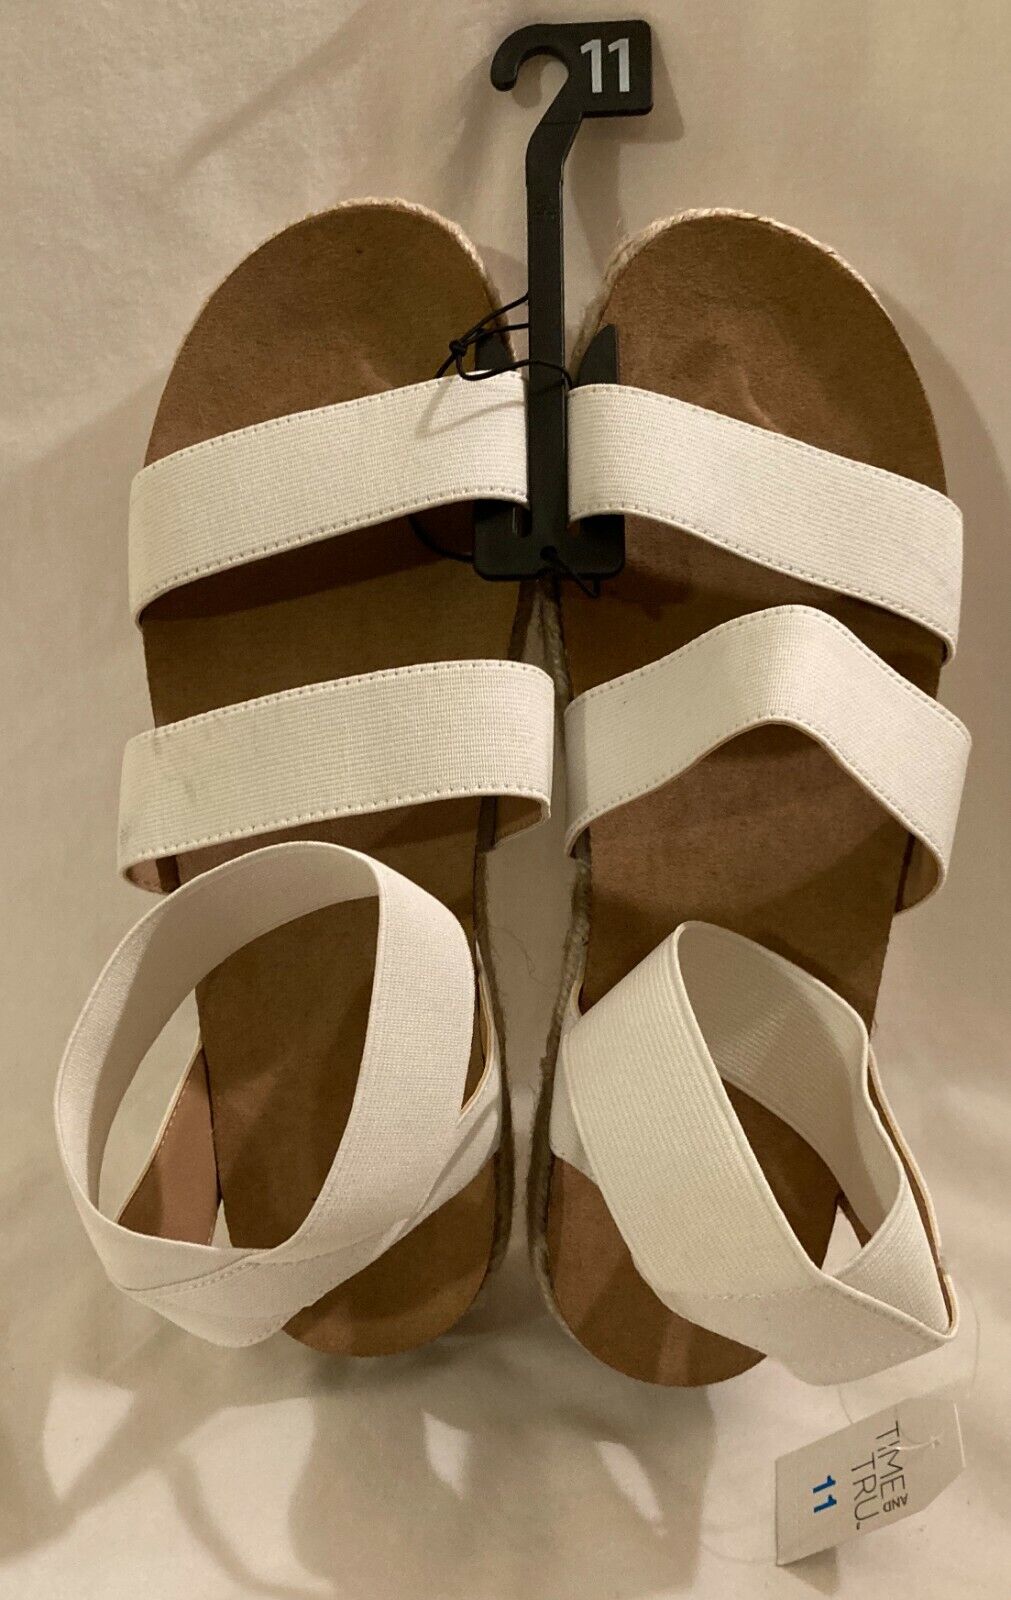 Womens Sandals White Elastic Material Comfort Shock Size 11 New